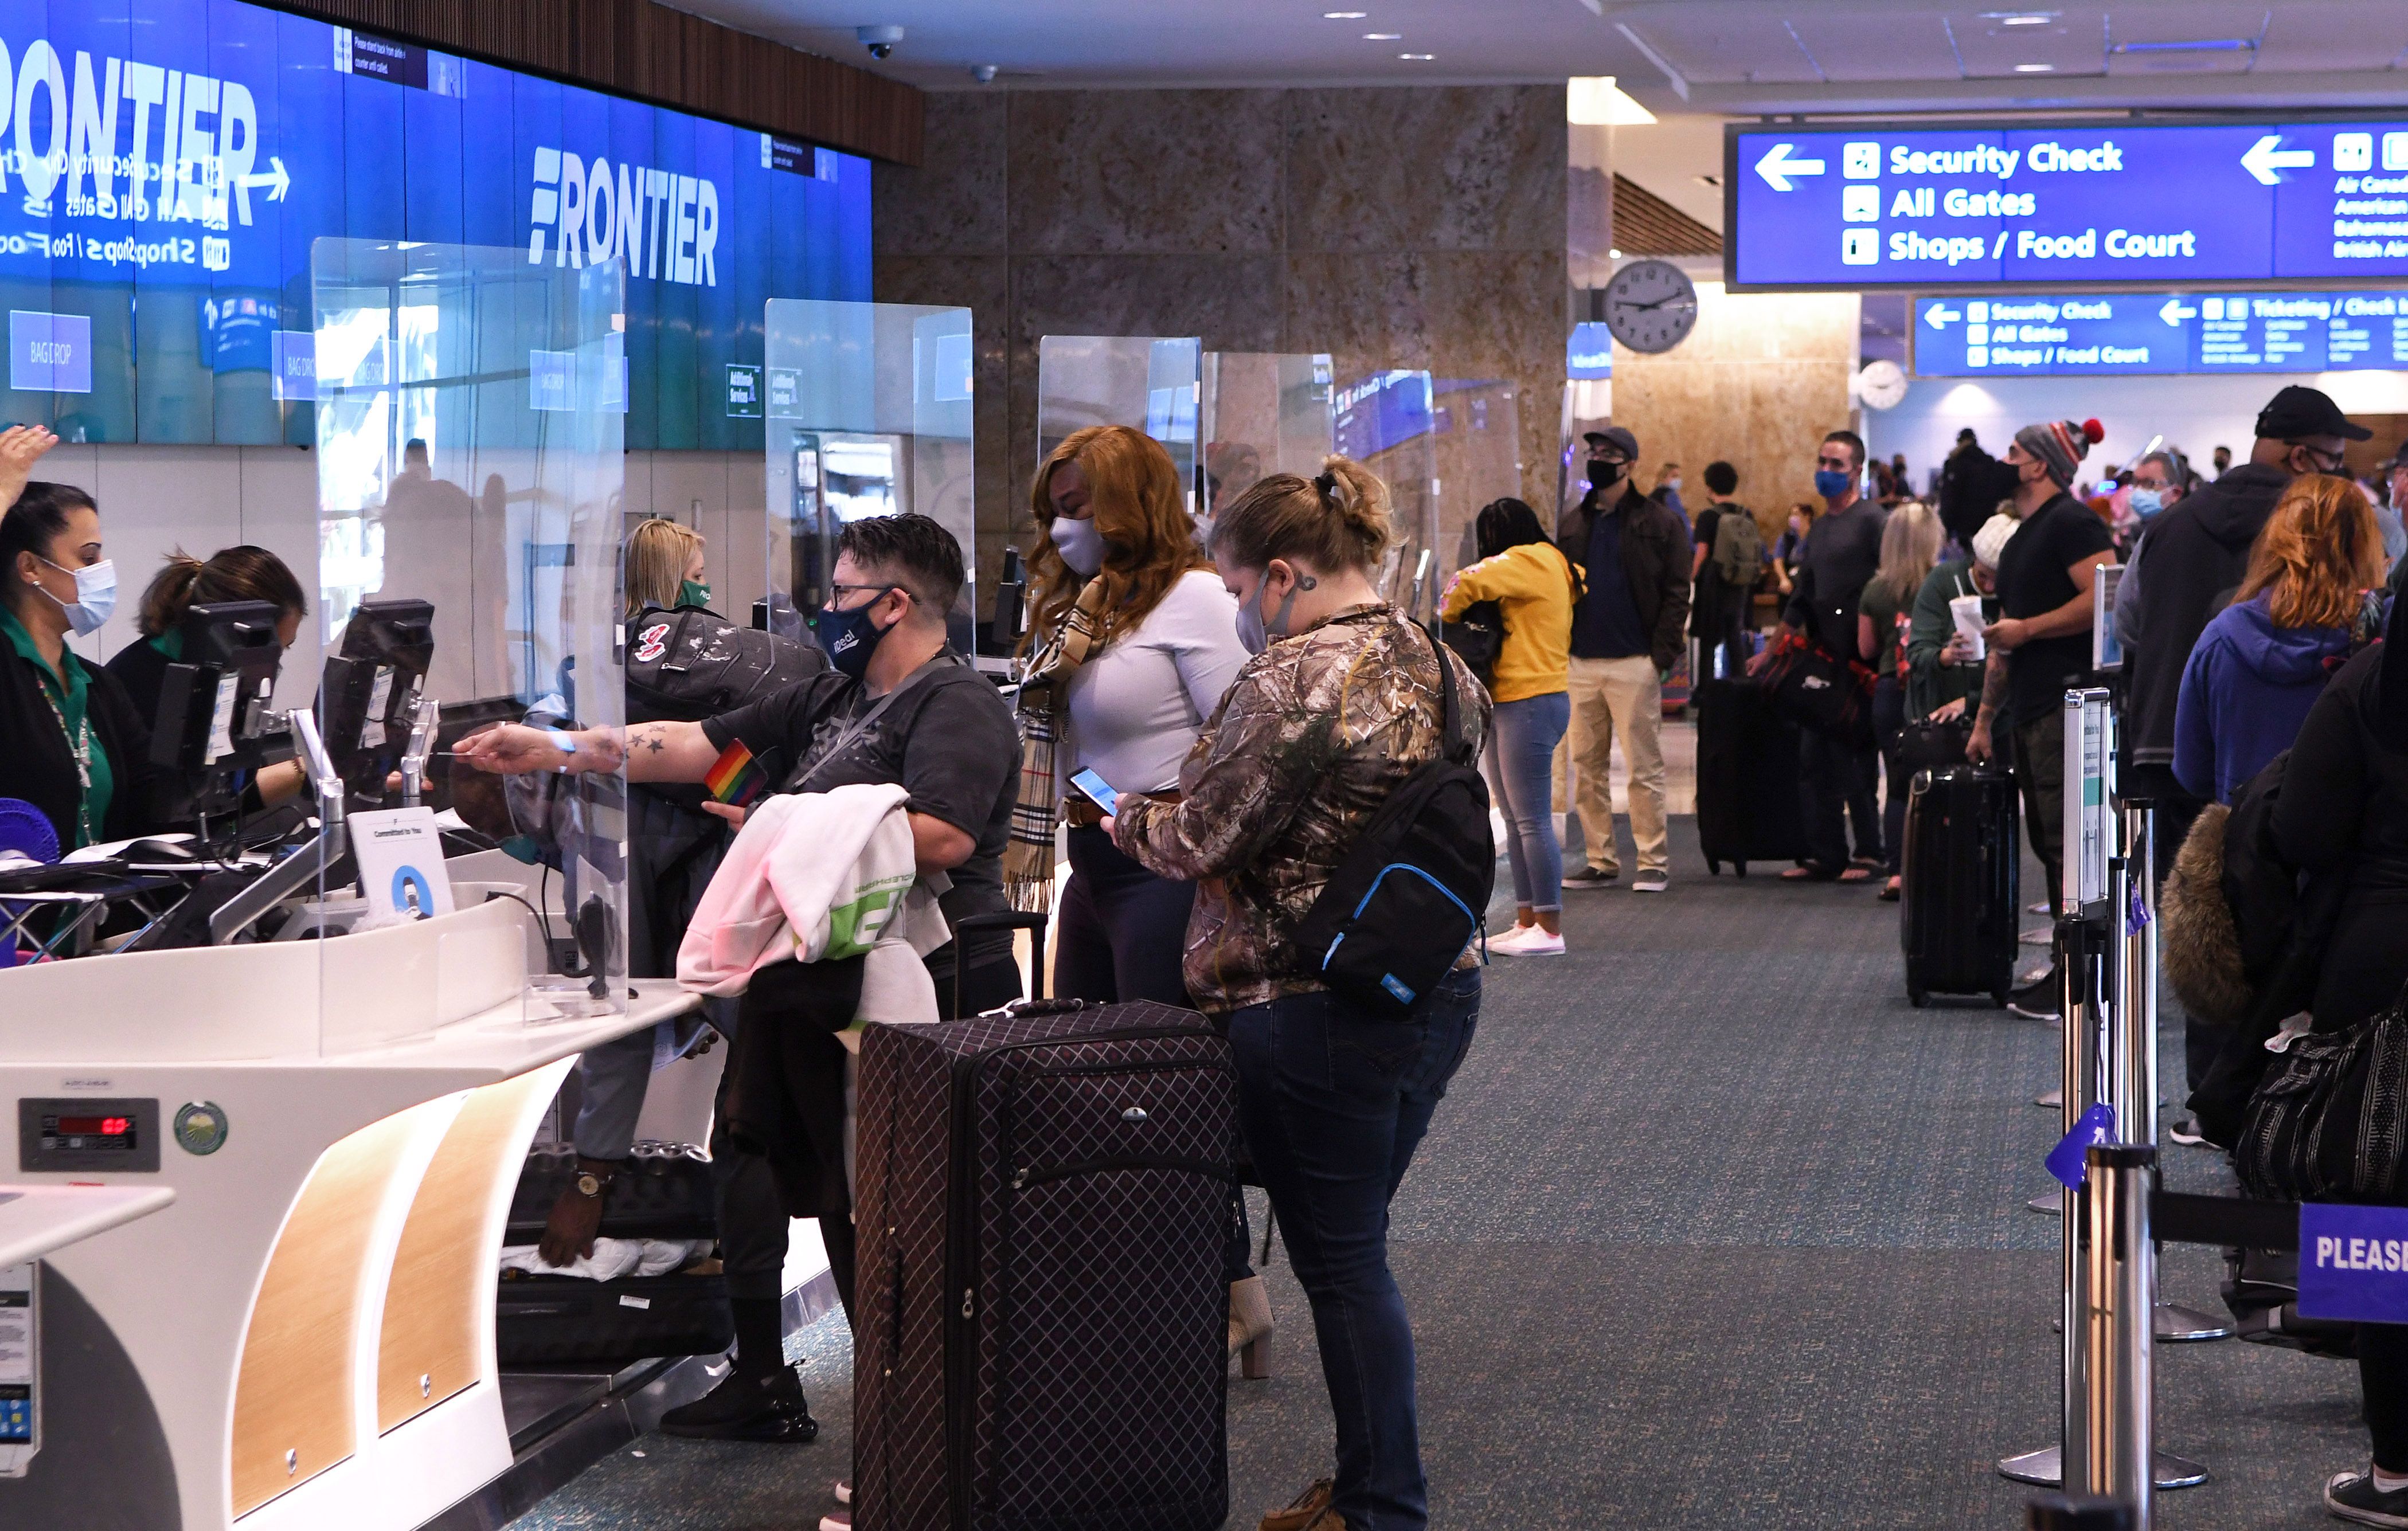 A crowd of people wearing masks and carrying mostly rolling suitcases stand at a check in counter with a Frontier sign 